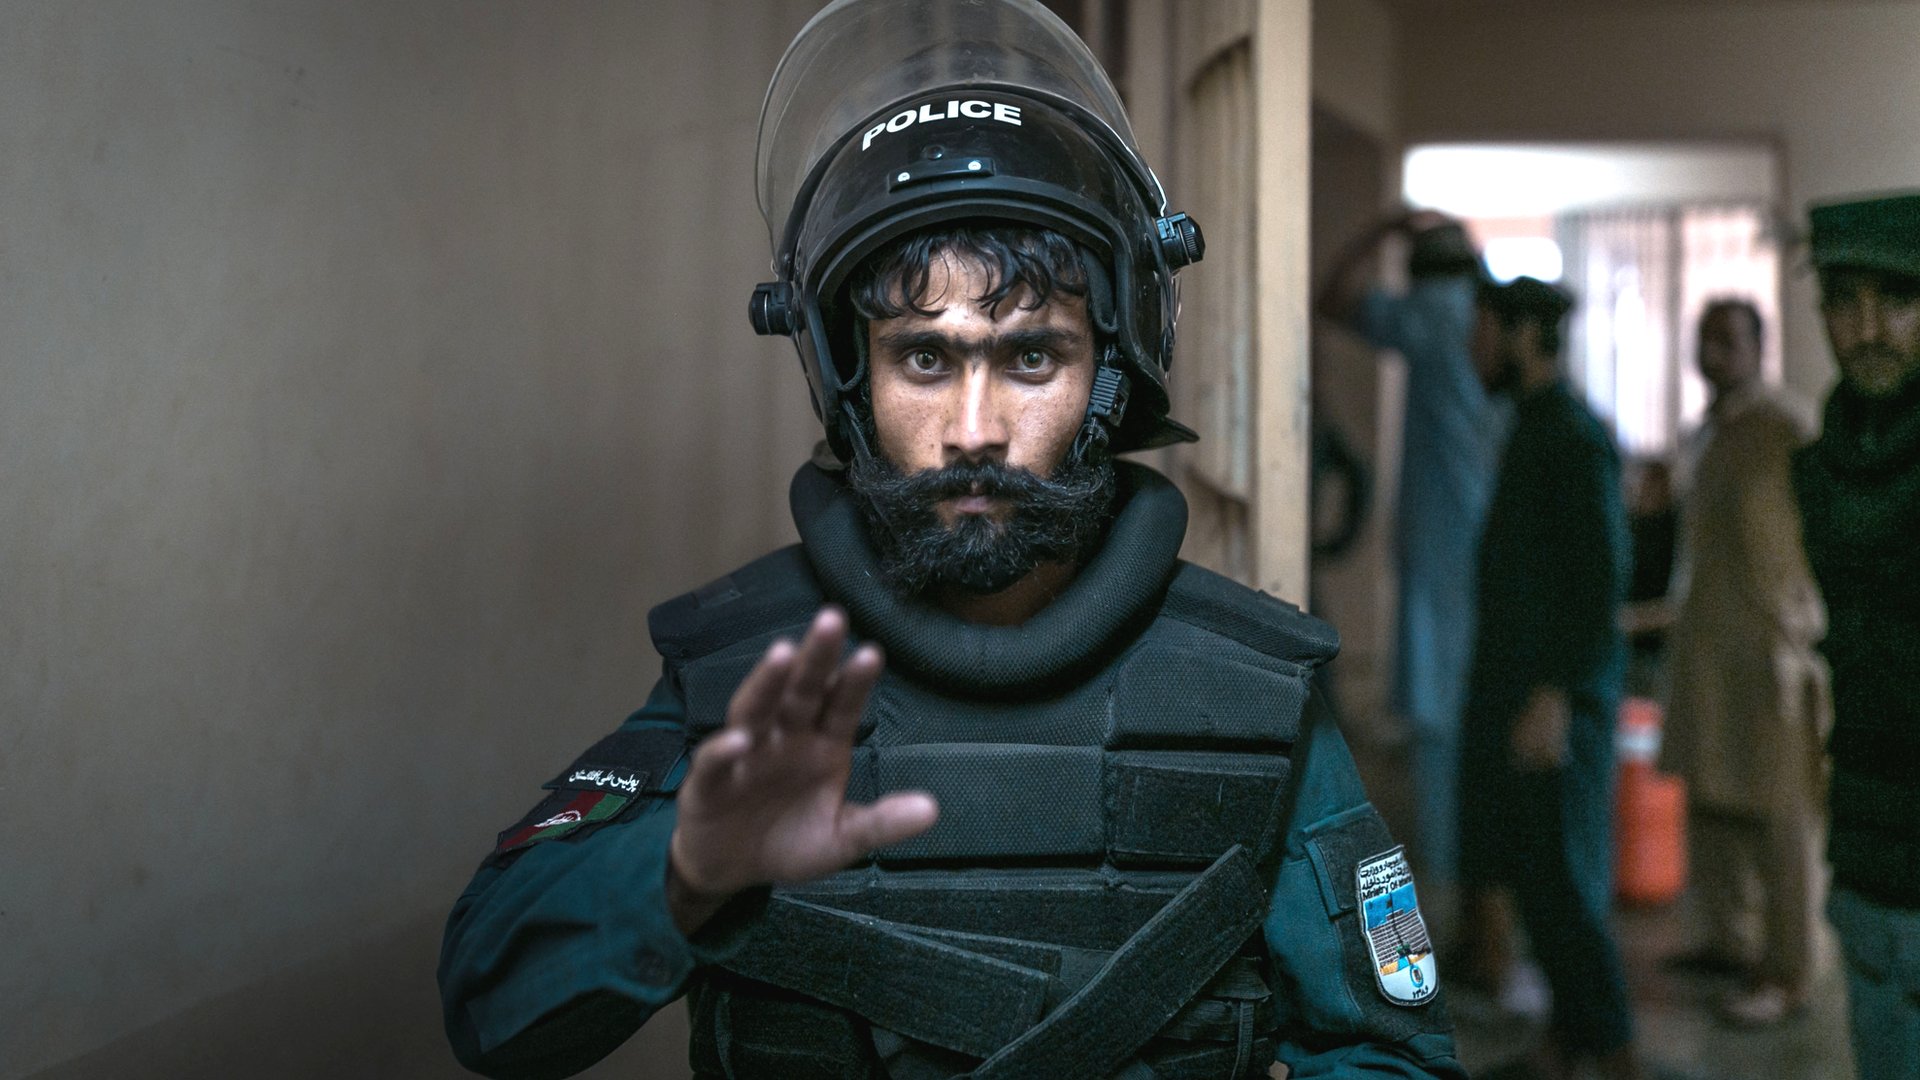 Afghan police officer in Pul-e-Charkhi prison